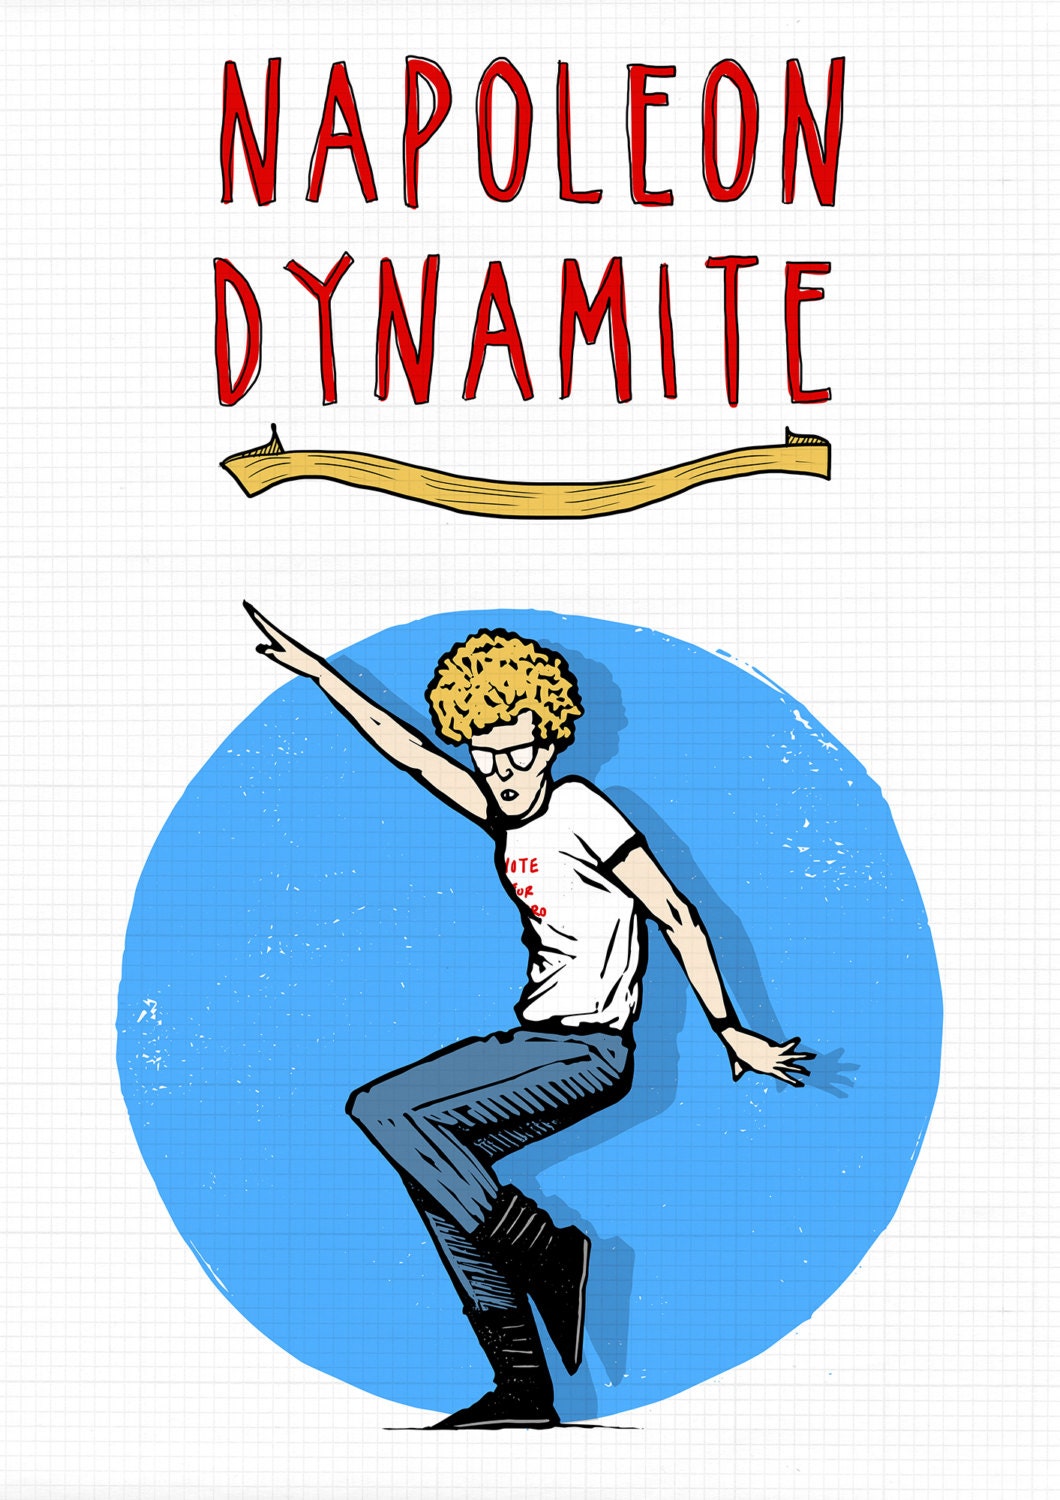 NAPOLEON DYNAMITE Signed Limited Edition Giclee Print Poster